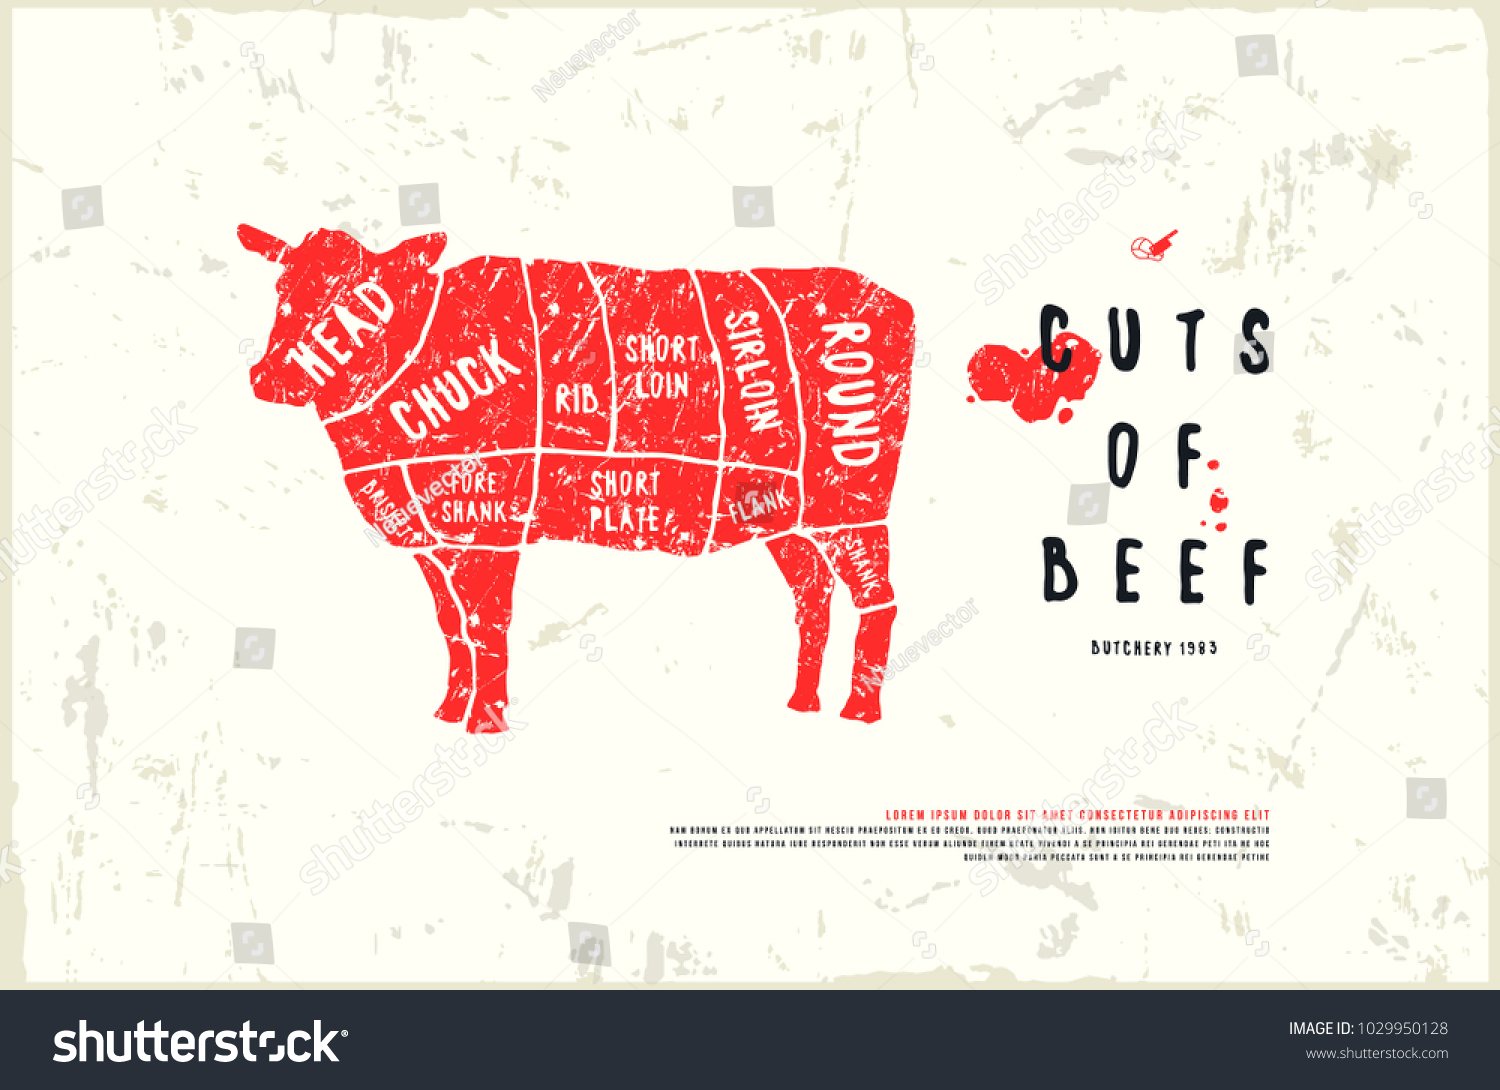 Stock Vector Beef Cuts Diagram In The Style Of Royalty Free Stock Vector 1029950128